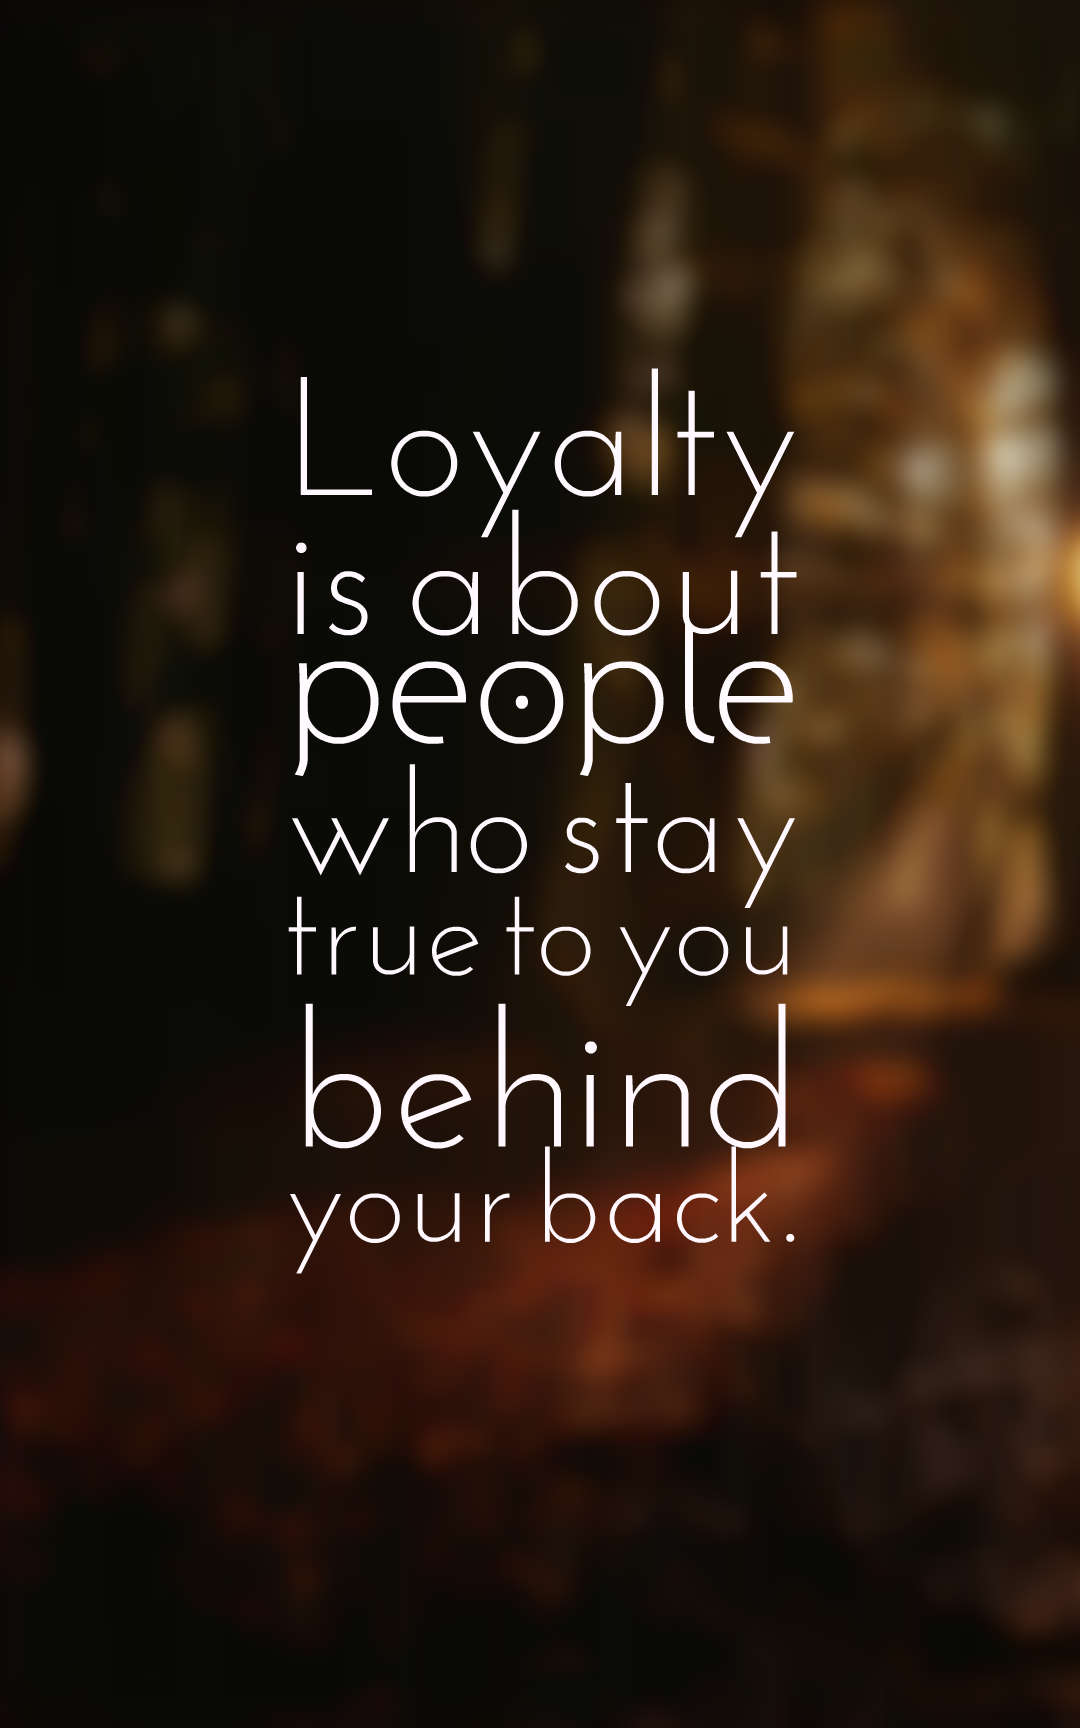 Loyalty is about people who stay true to you behind your back.